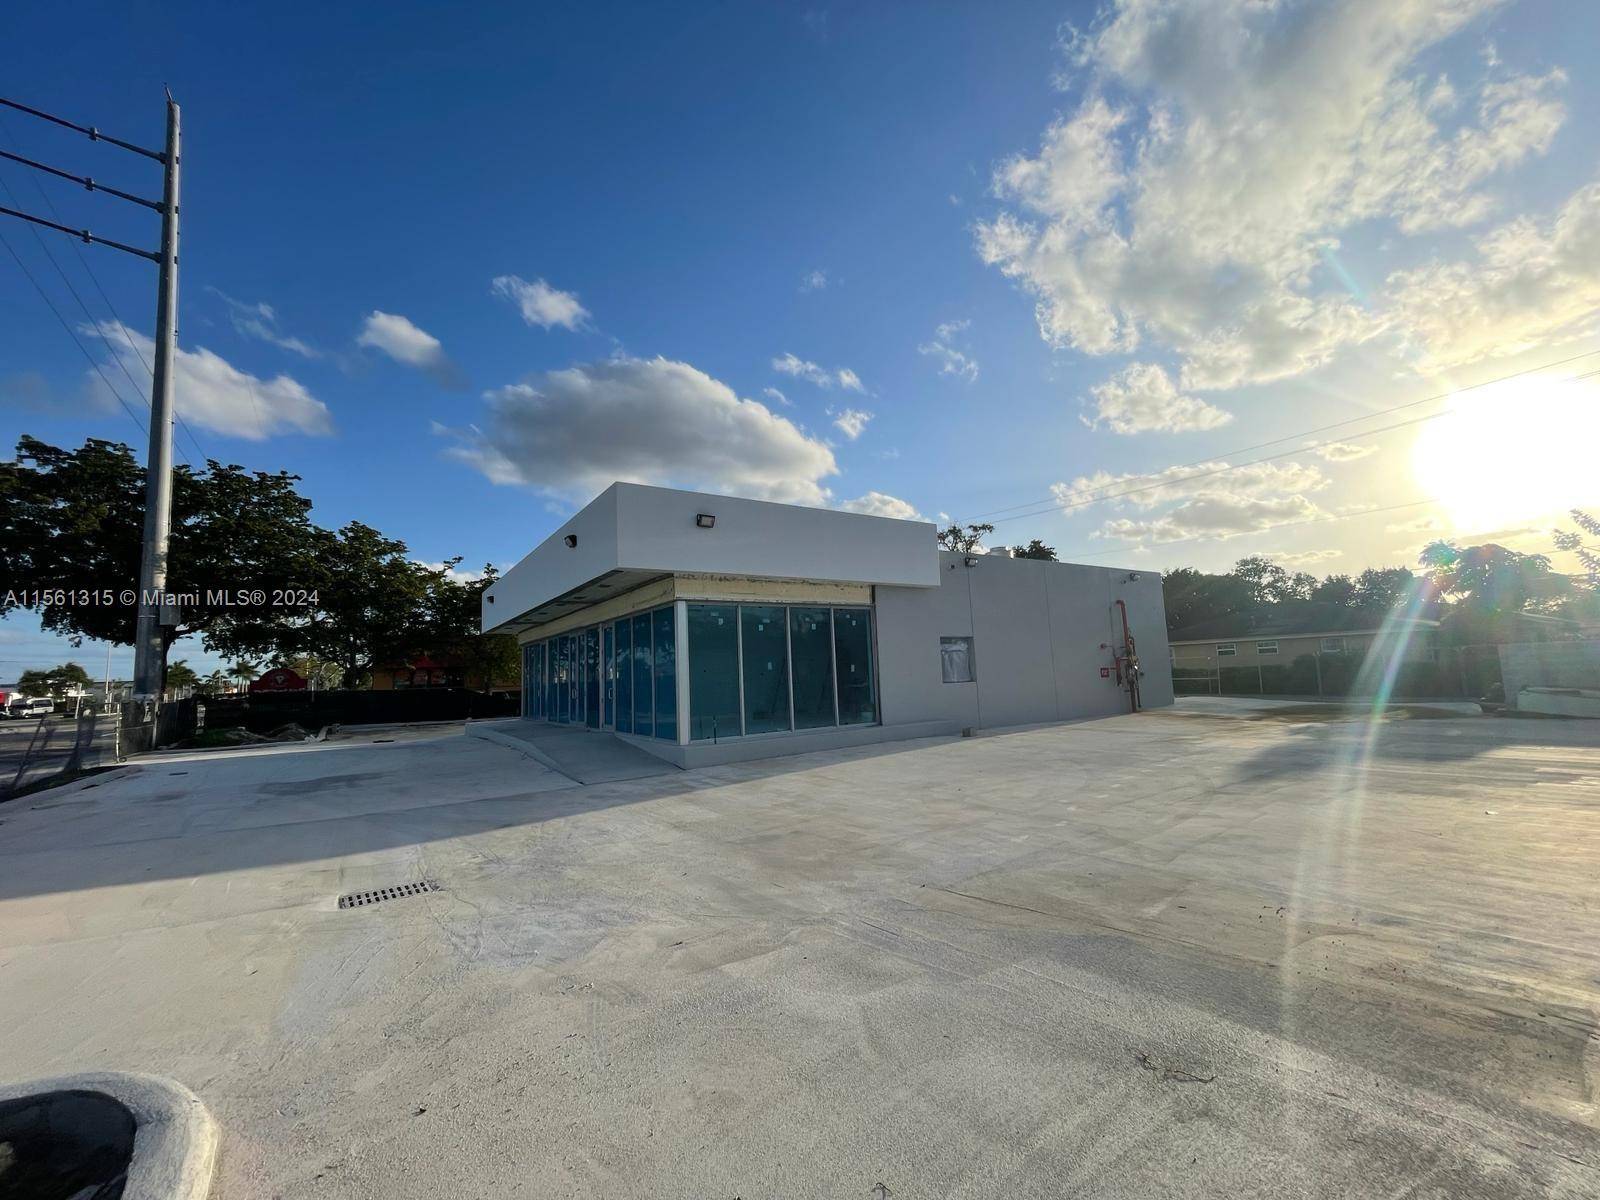 Here is a Great Opportunity for a Smart Business Entrepreneur to conduct business on this Corner Lot Commercial Retail Free Standing Building in an excellent location in North Miami.